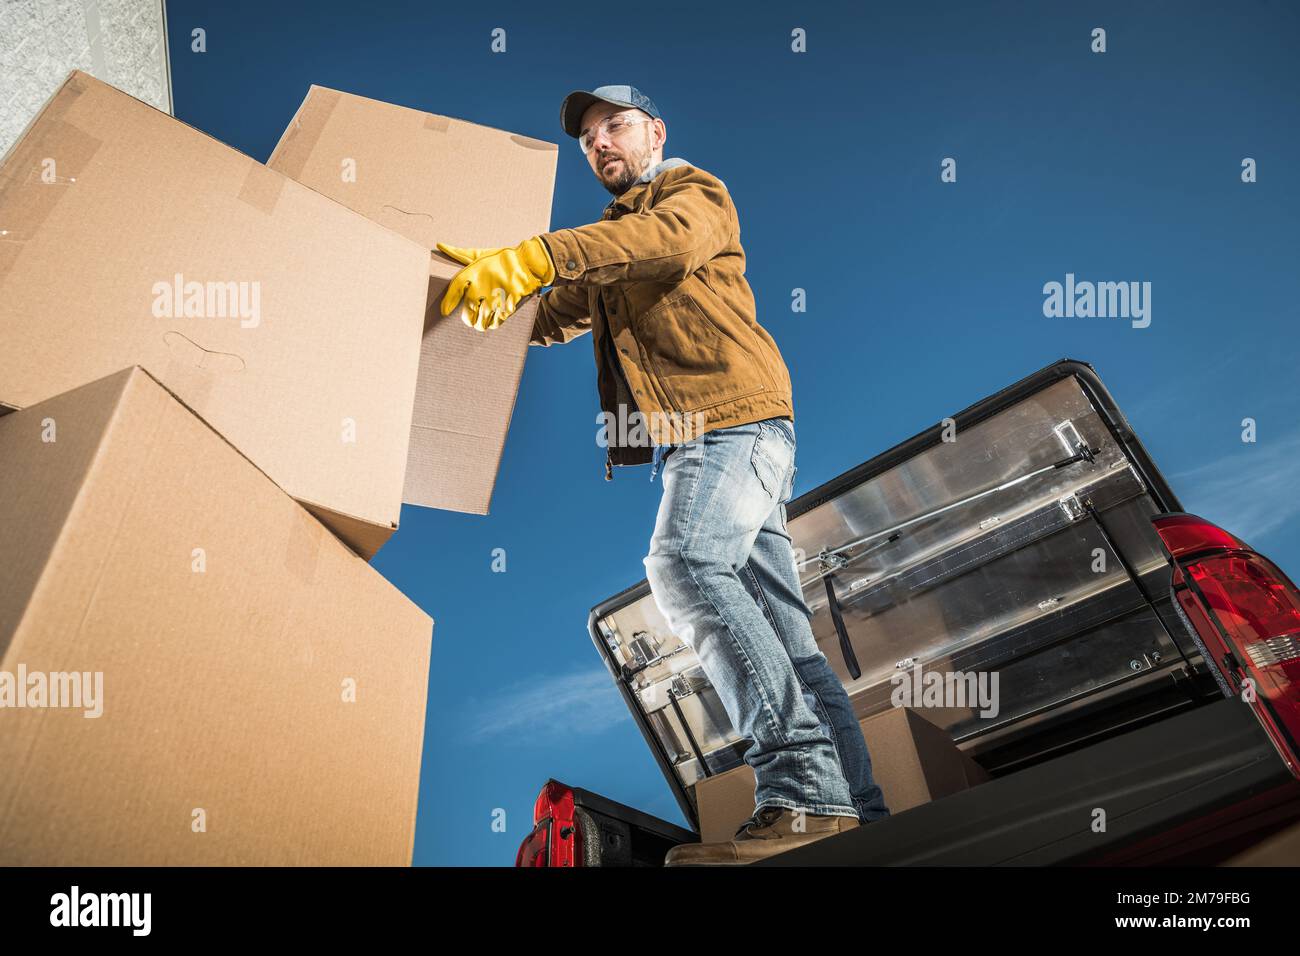 Moving Company Worker Loading Big Cardboard Boxes on the Cargo Bed of His Pickup Truck. Relocation Services Theme. Stock Photo